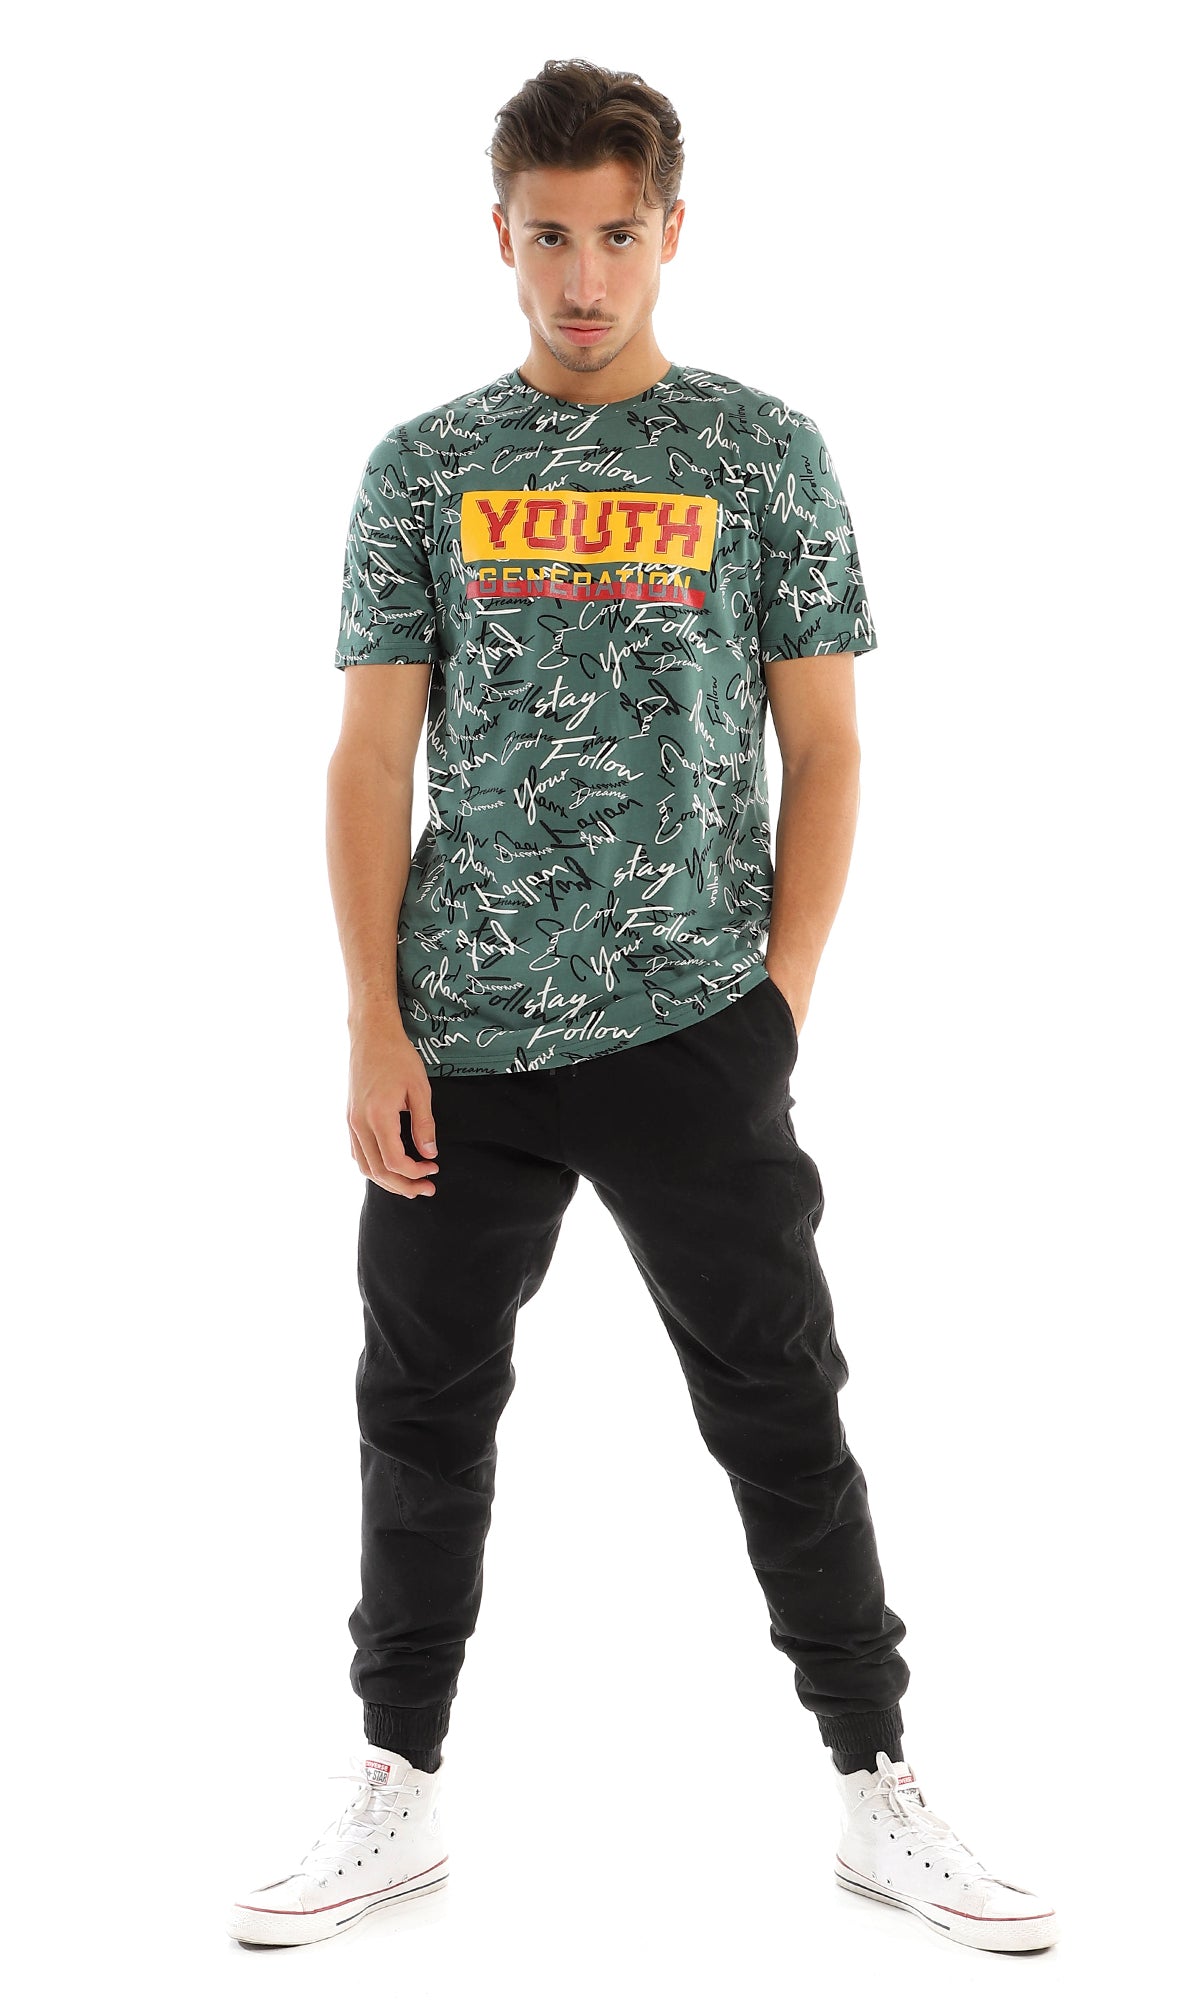 97370 "Youth Generation" Printing & Self Patterned Green T-Shirt